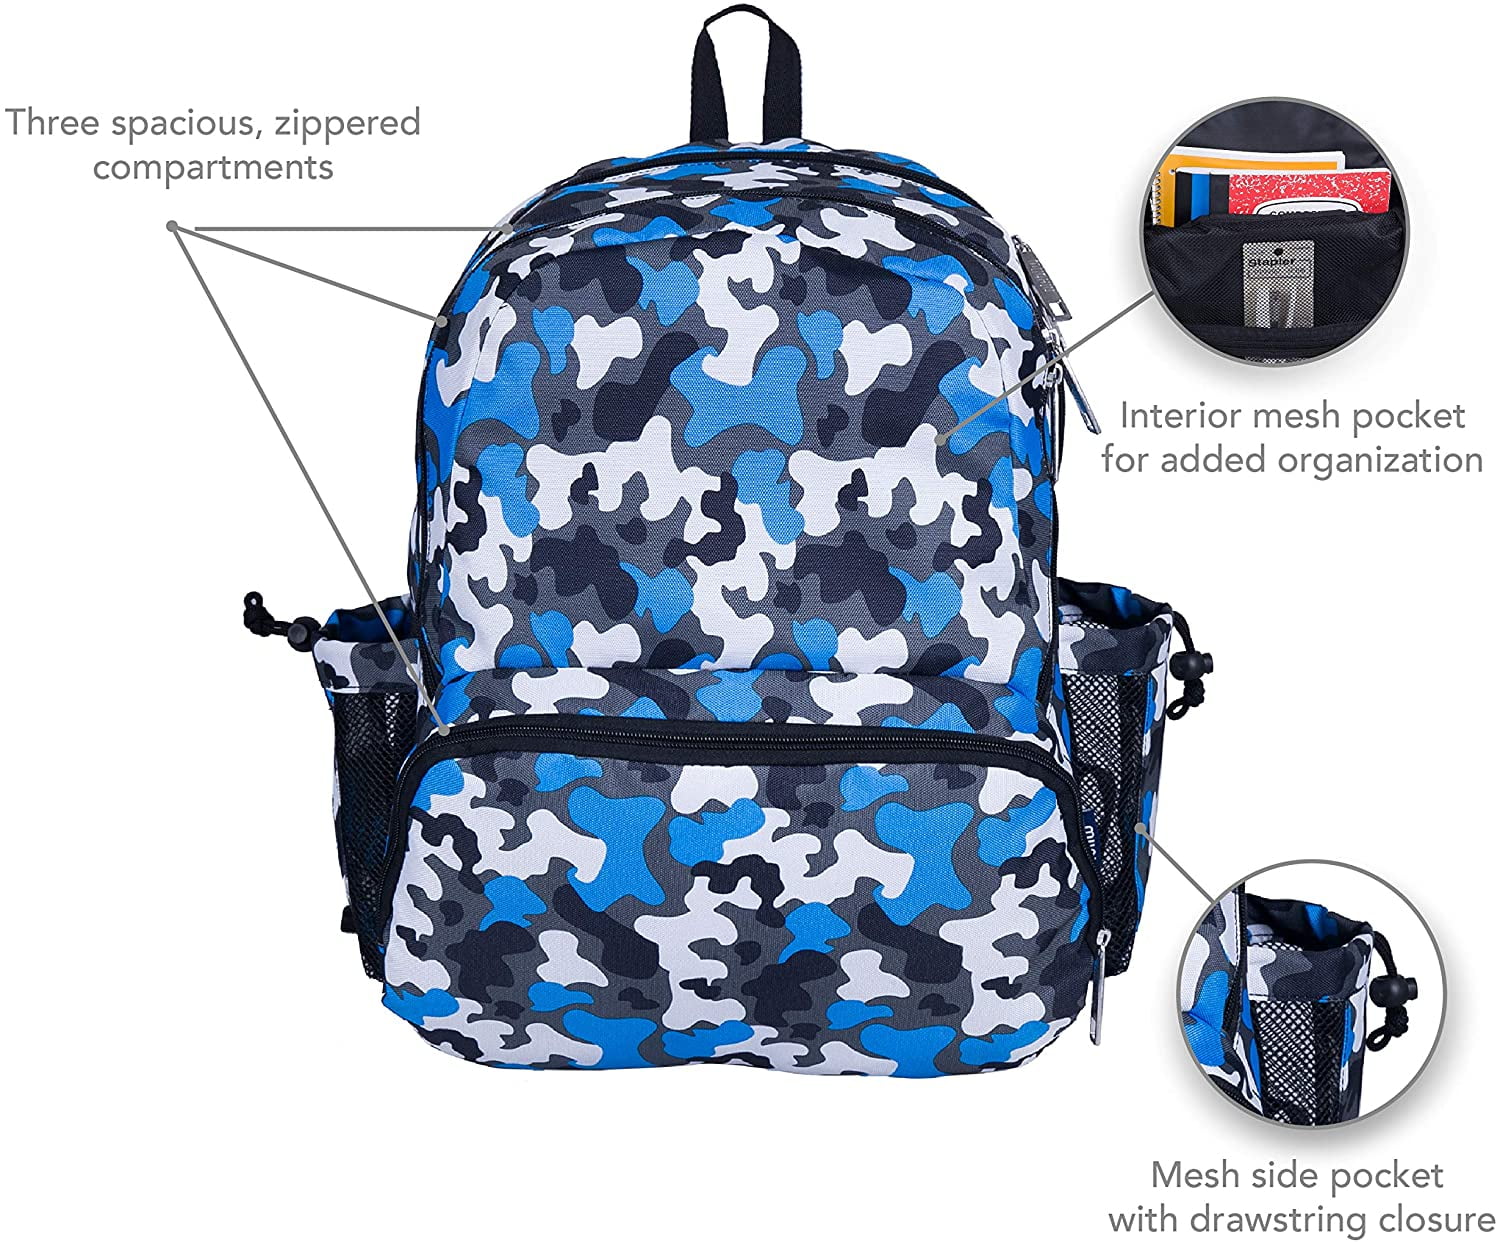 Under One Sky Kid's William Camo Backpack In Blue Multi